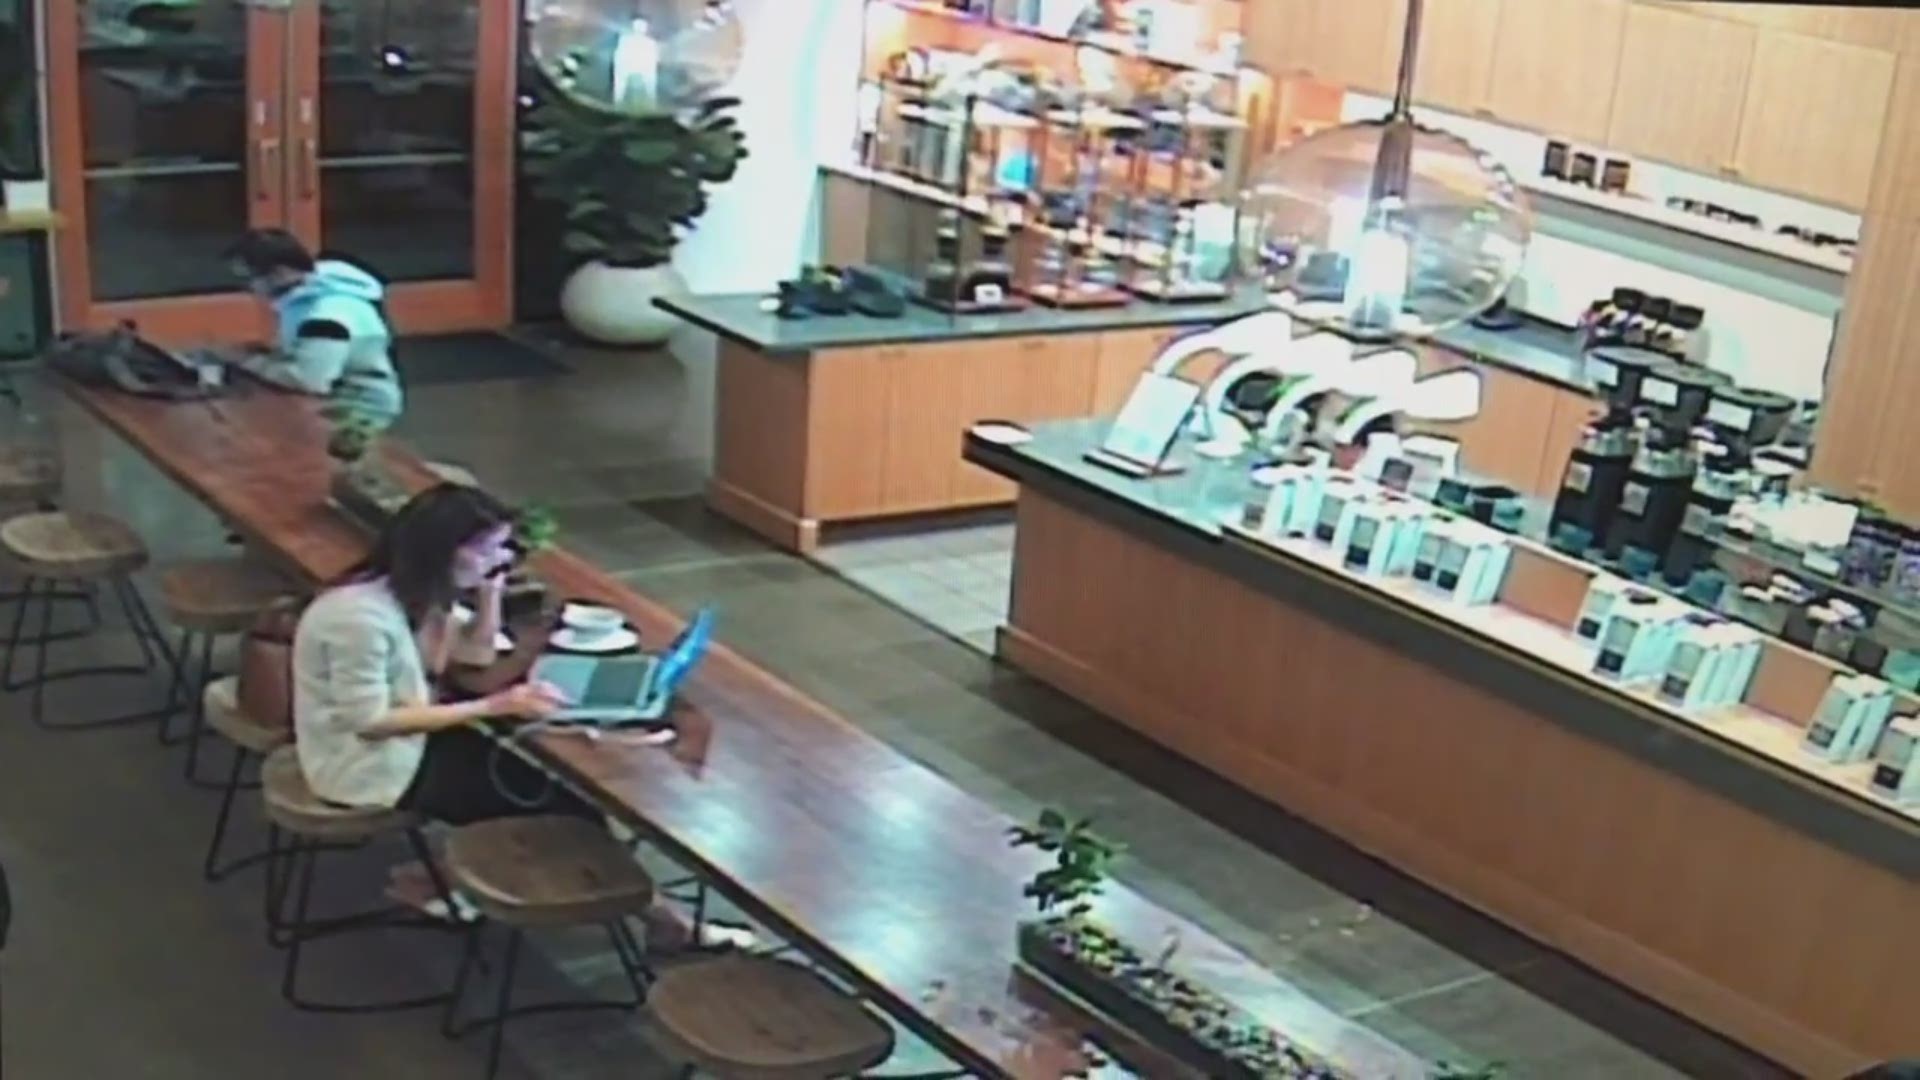 At least five instances of these so-called strong-arm robberies have occurred at coffee shops around Davis over the past month or so. According to investigators, the suspects during each crime were young males.